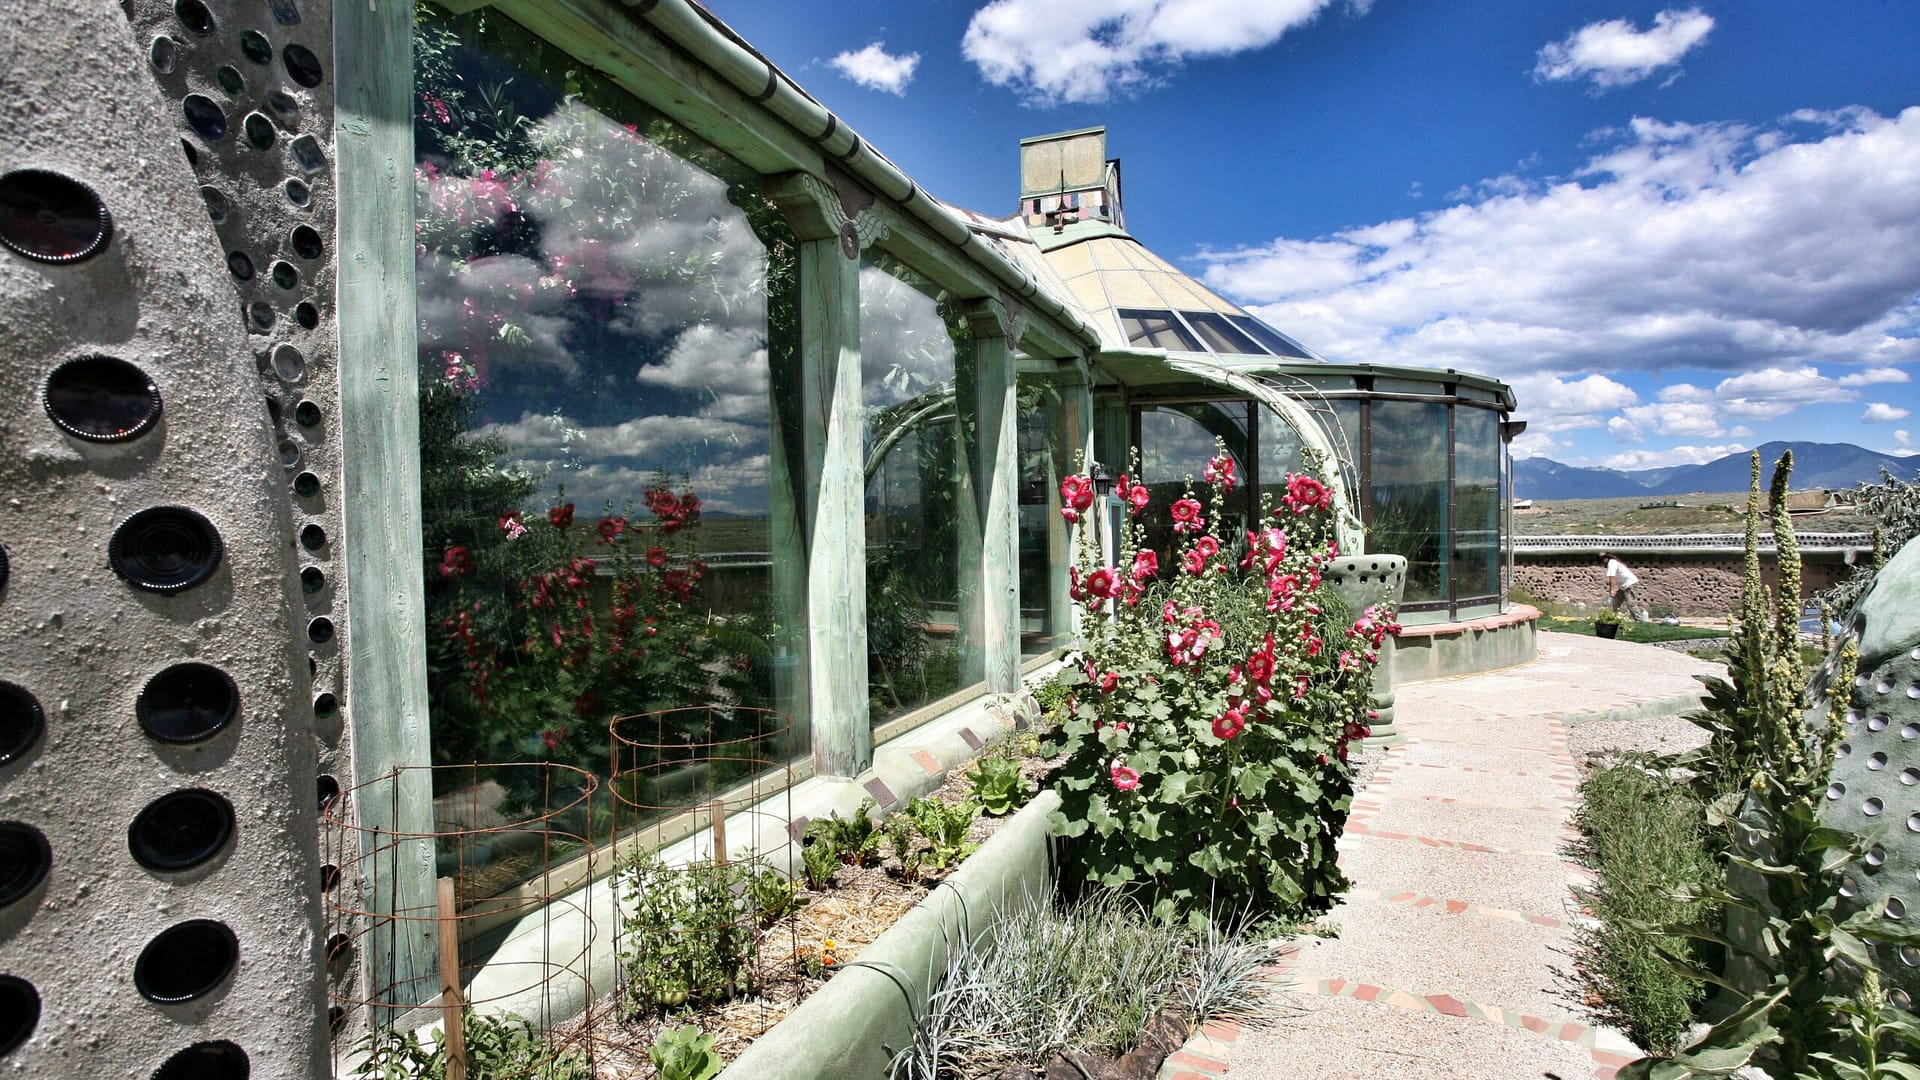 Image: View along the outside wall of an Earthship. Plants are seen growing inside and out!